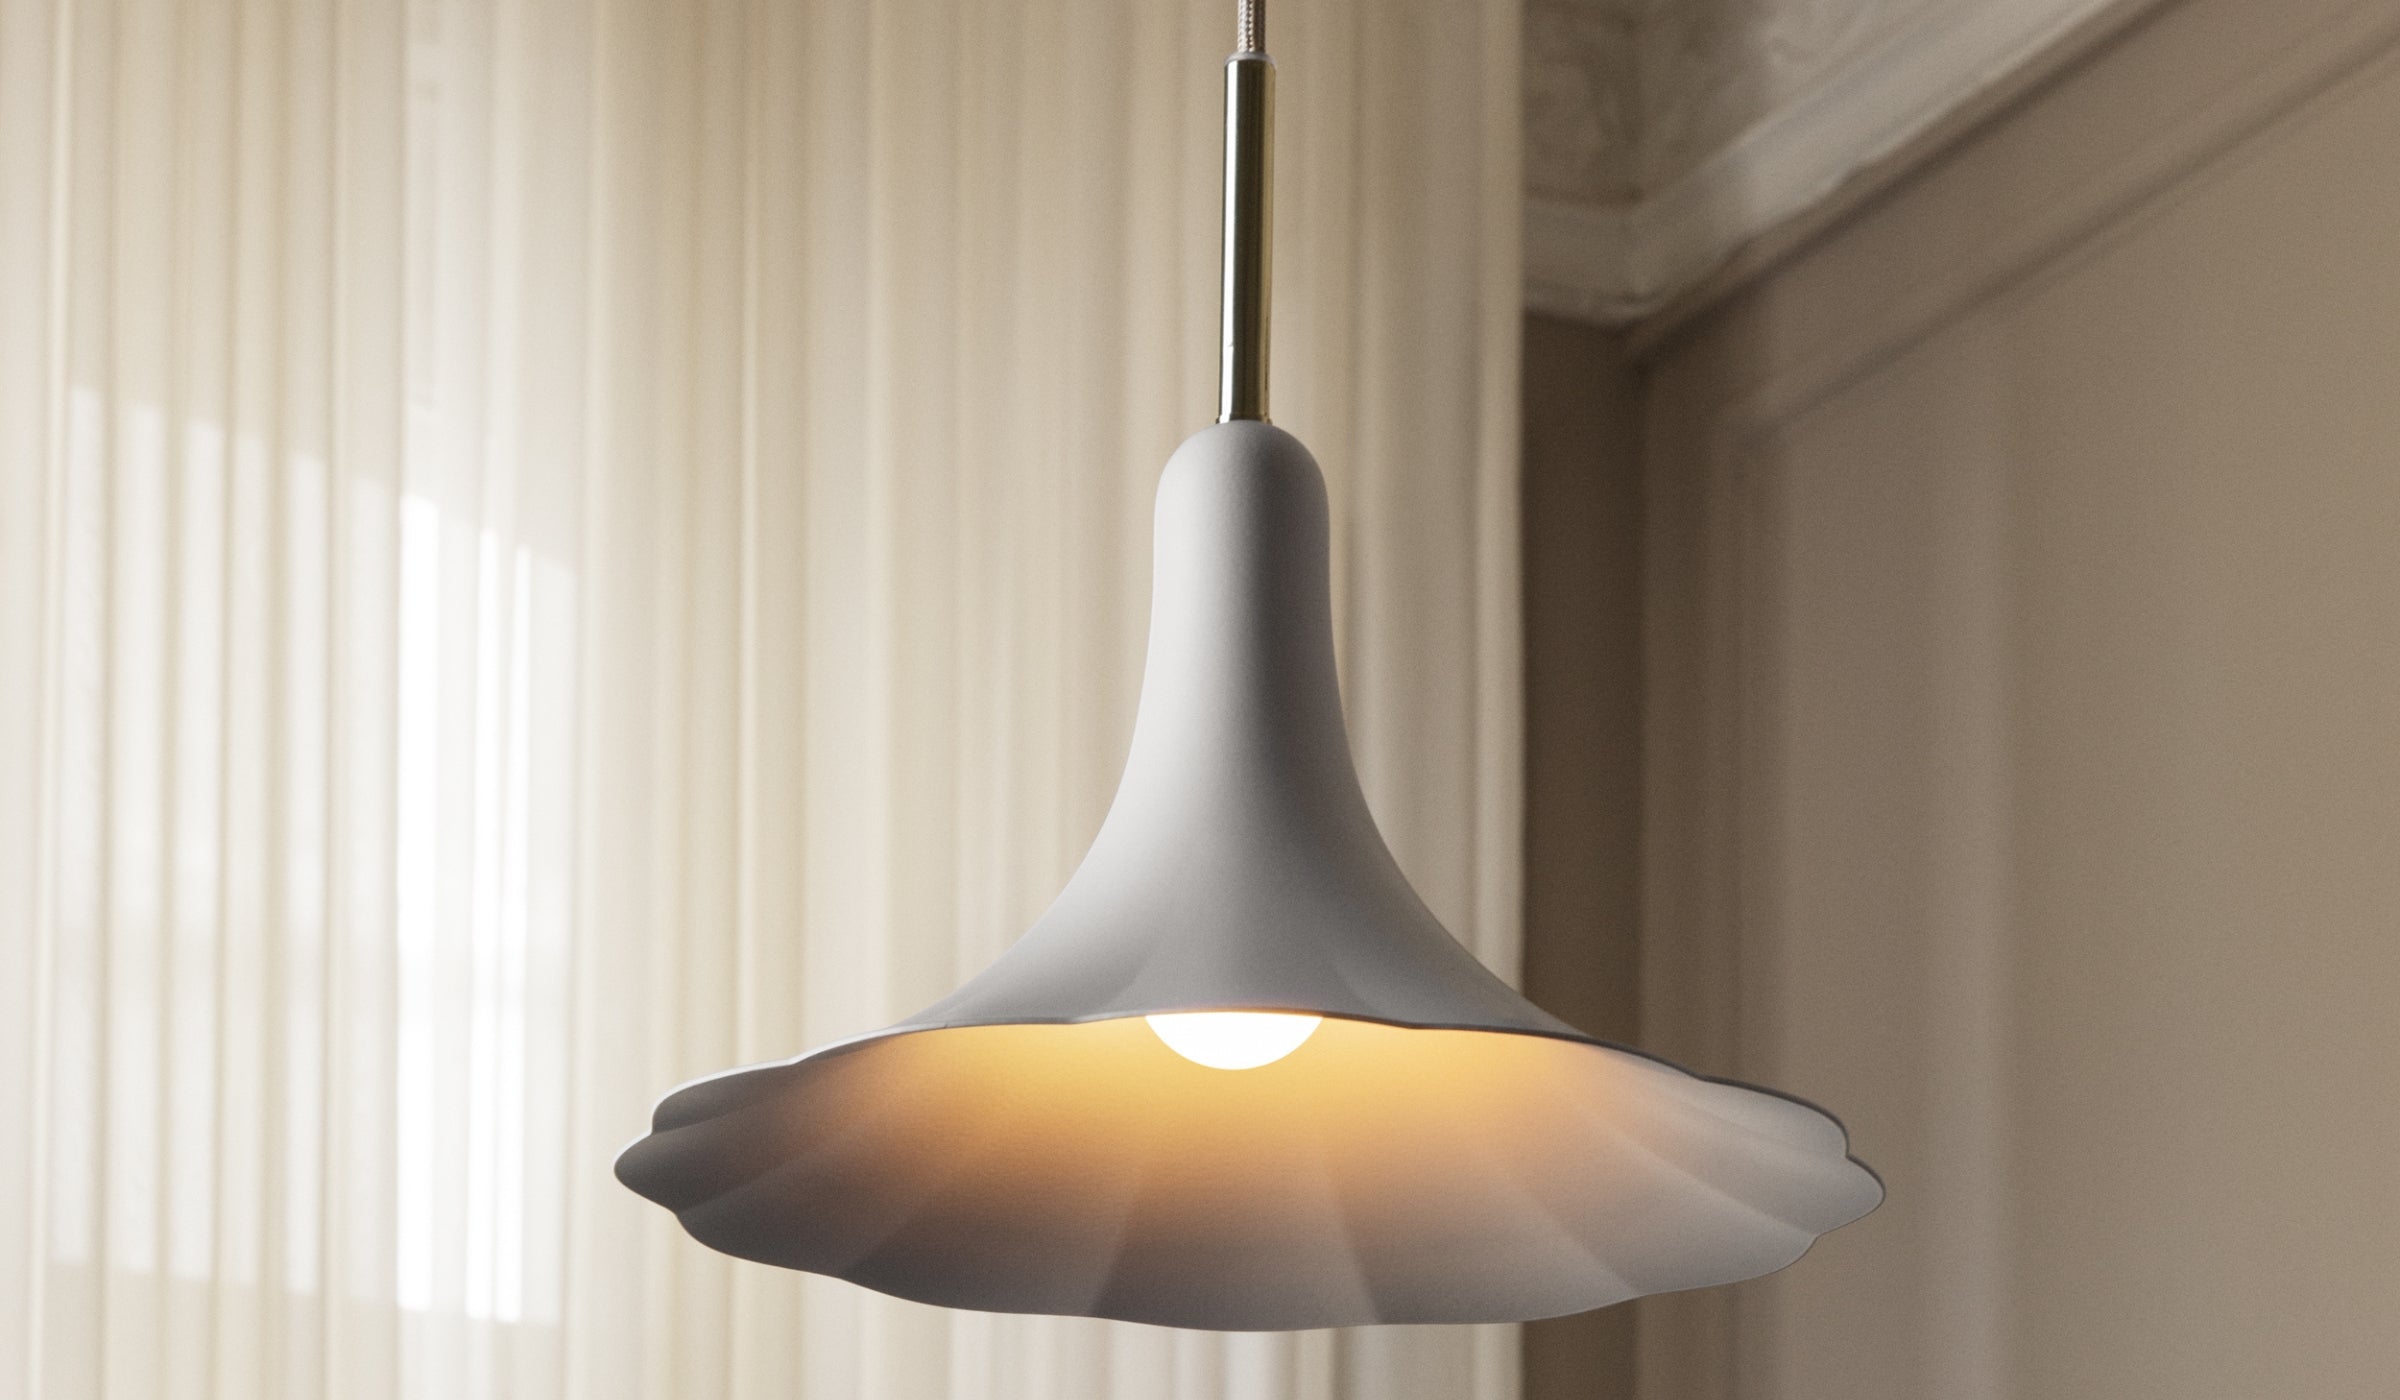 Petalii 1 Small - Polished brass pendant light, white metal lampshade